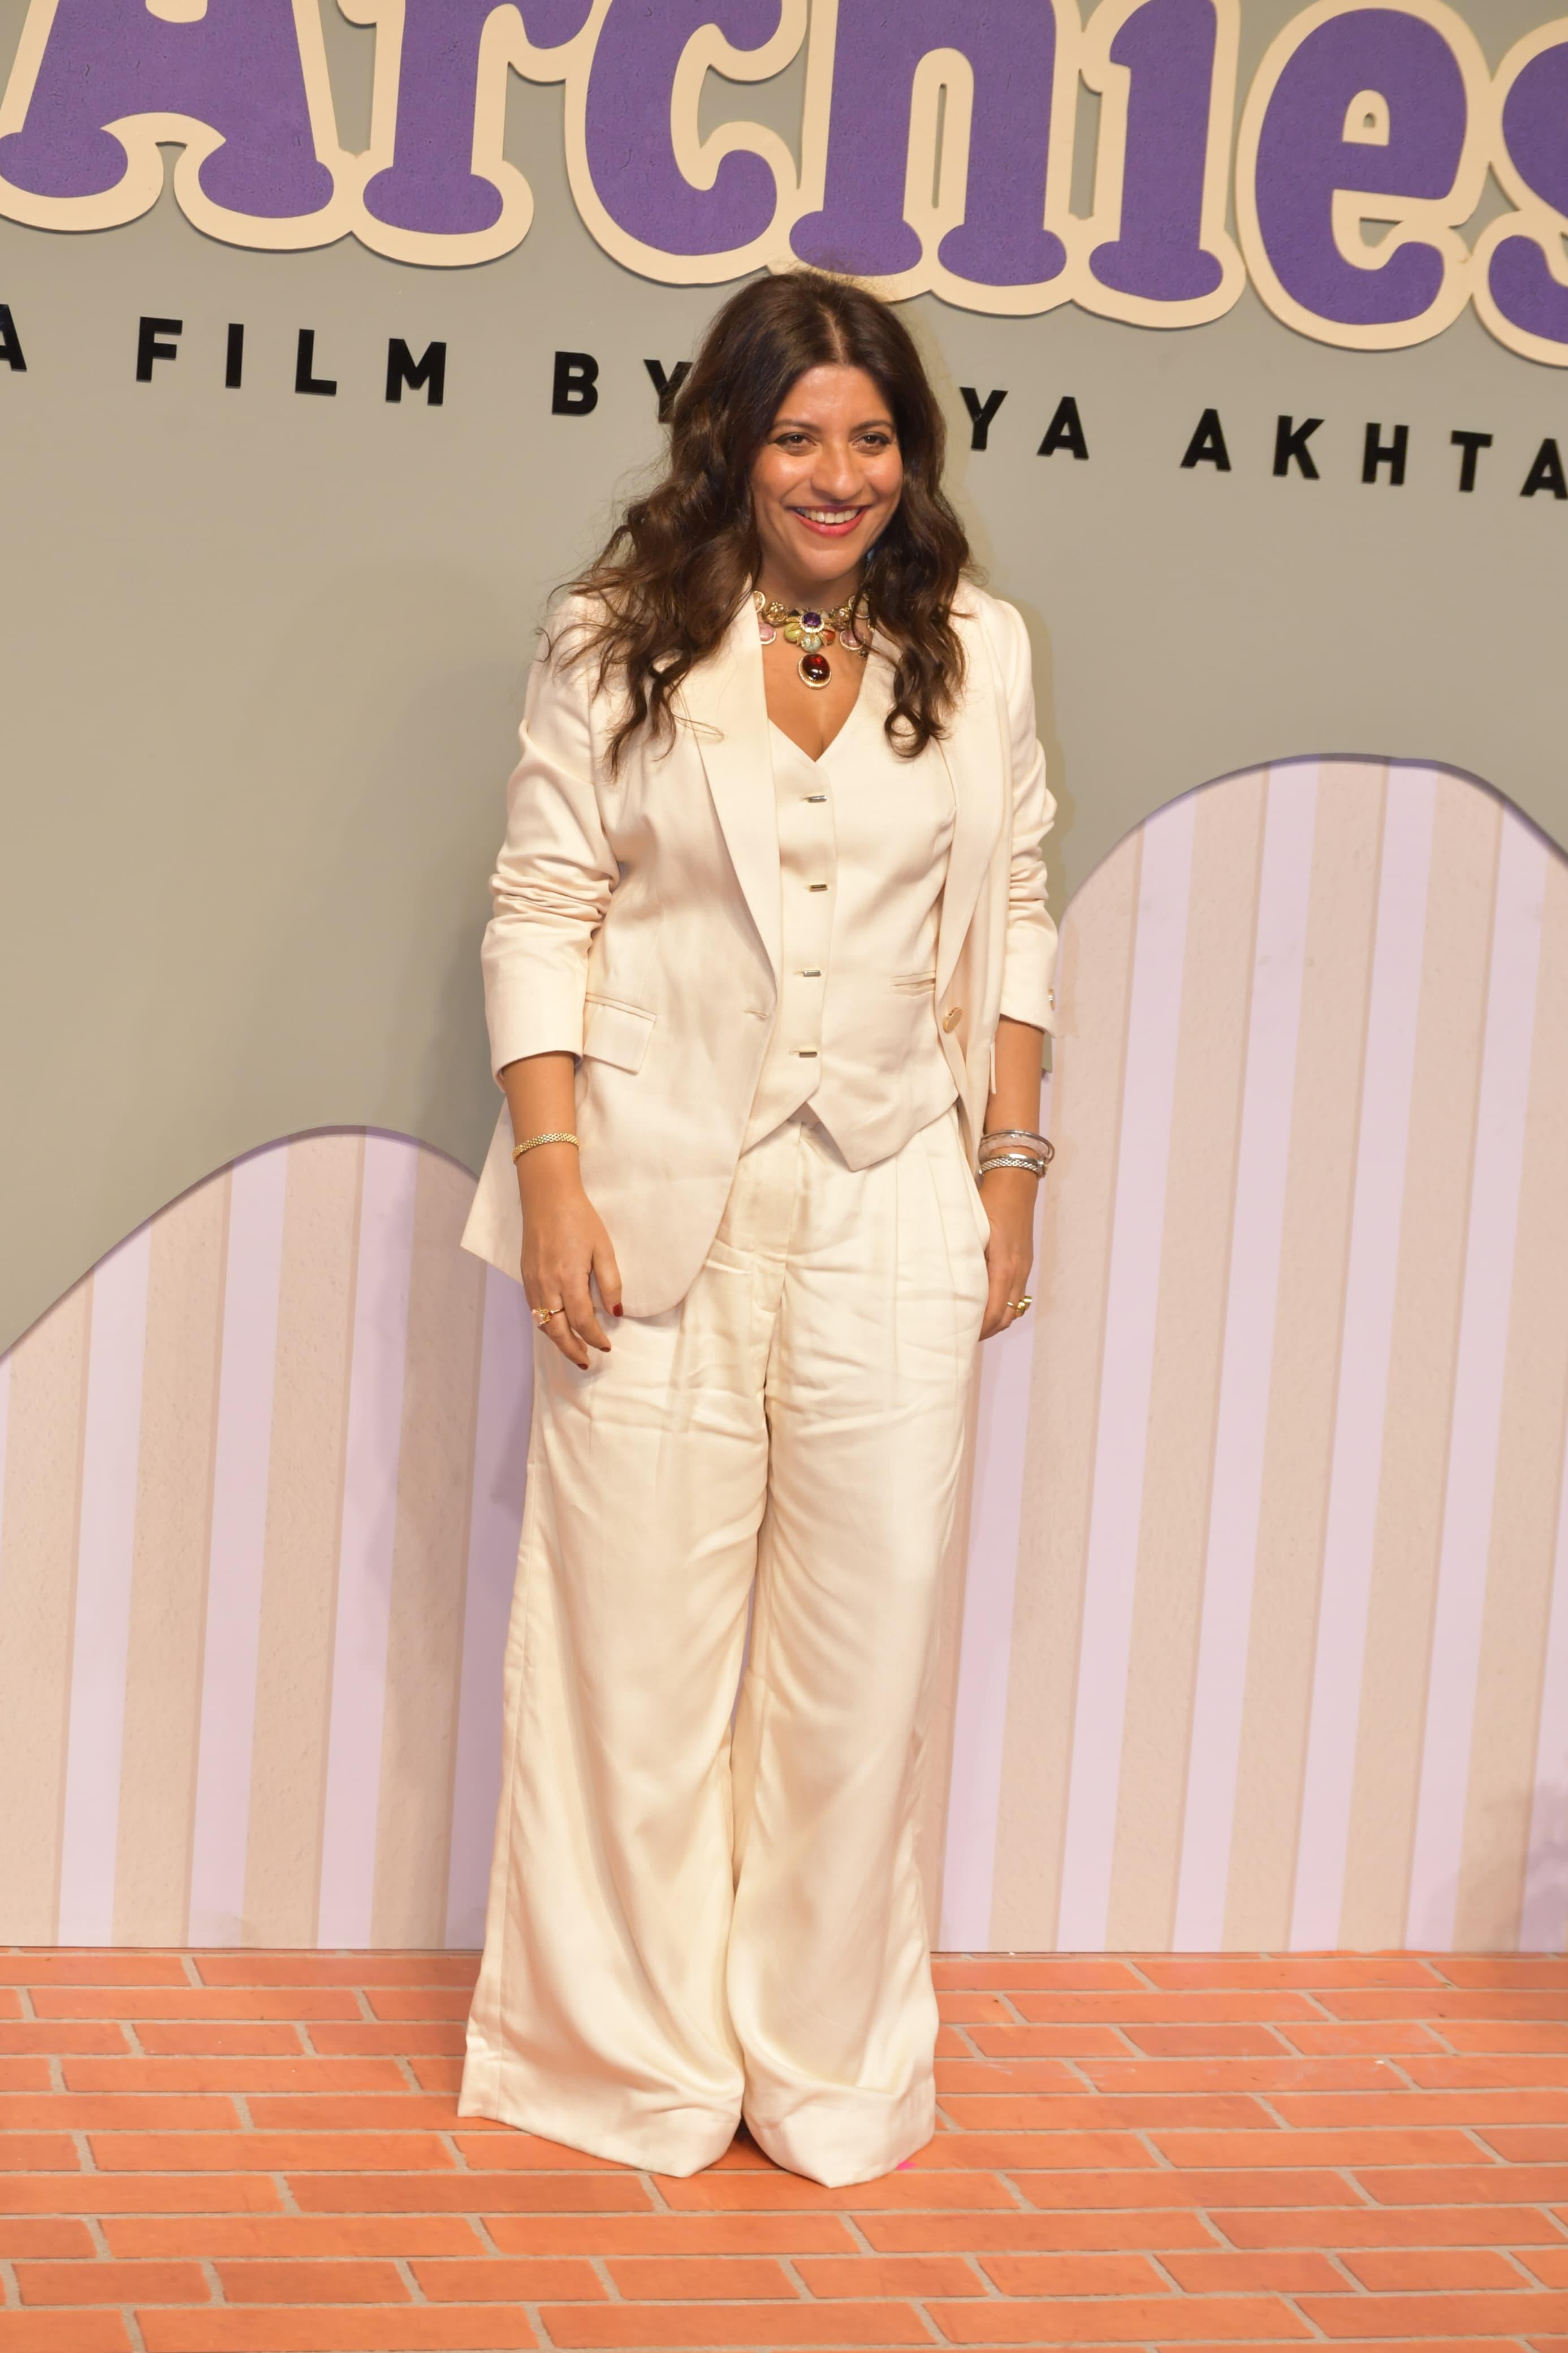 Zoya Akhtar was present for the launch of her musical. She looked beautiful in this white set